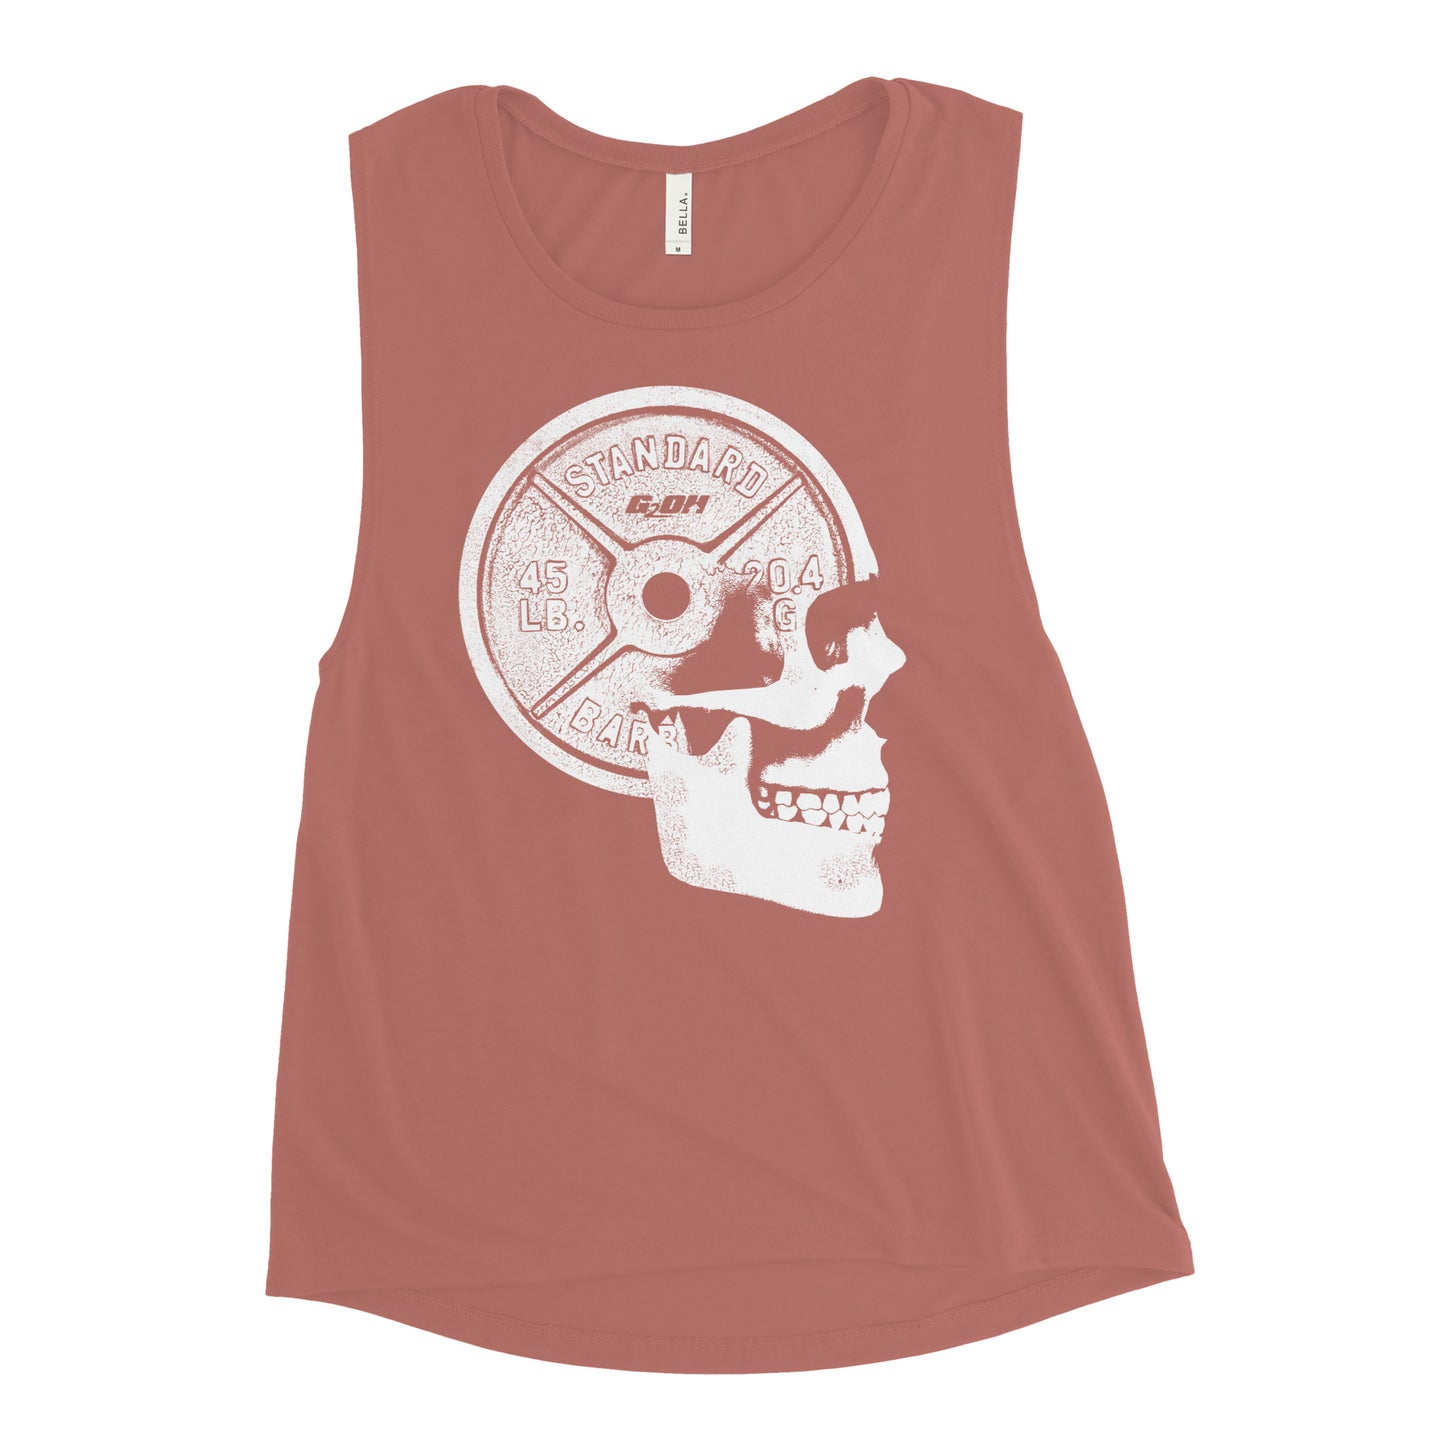 Weights On The Brain Women's Muscle Tank